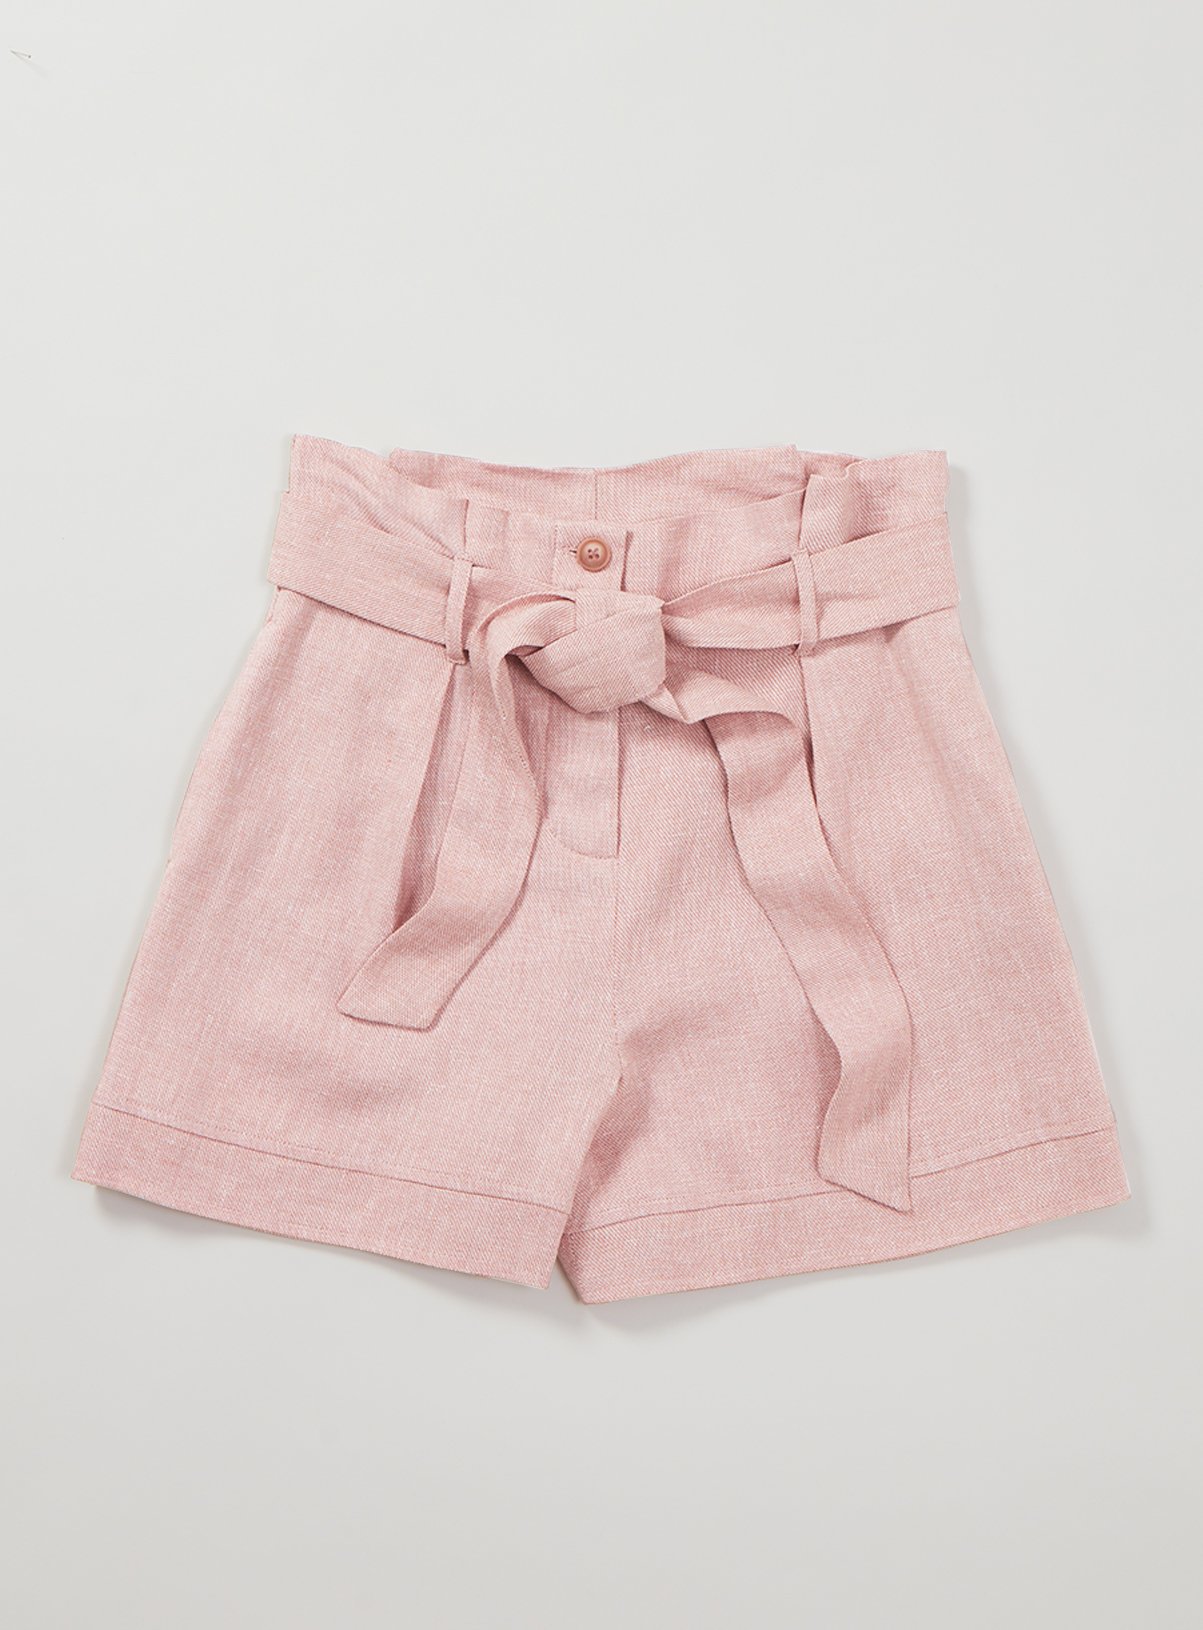 Graduate Fashion Week Pink Shorts With Linen Review